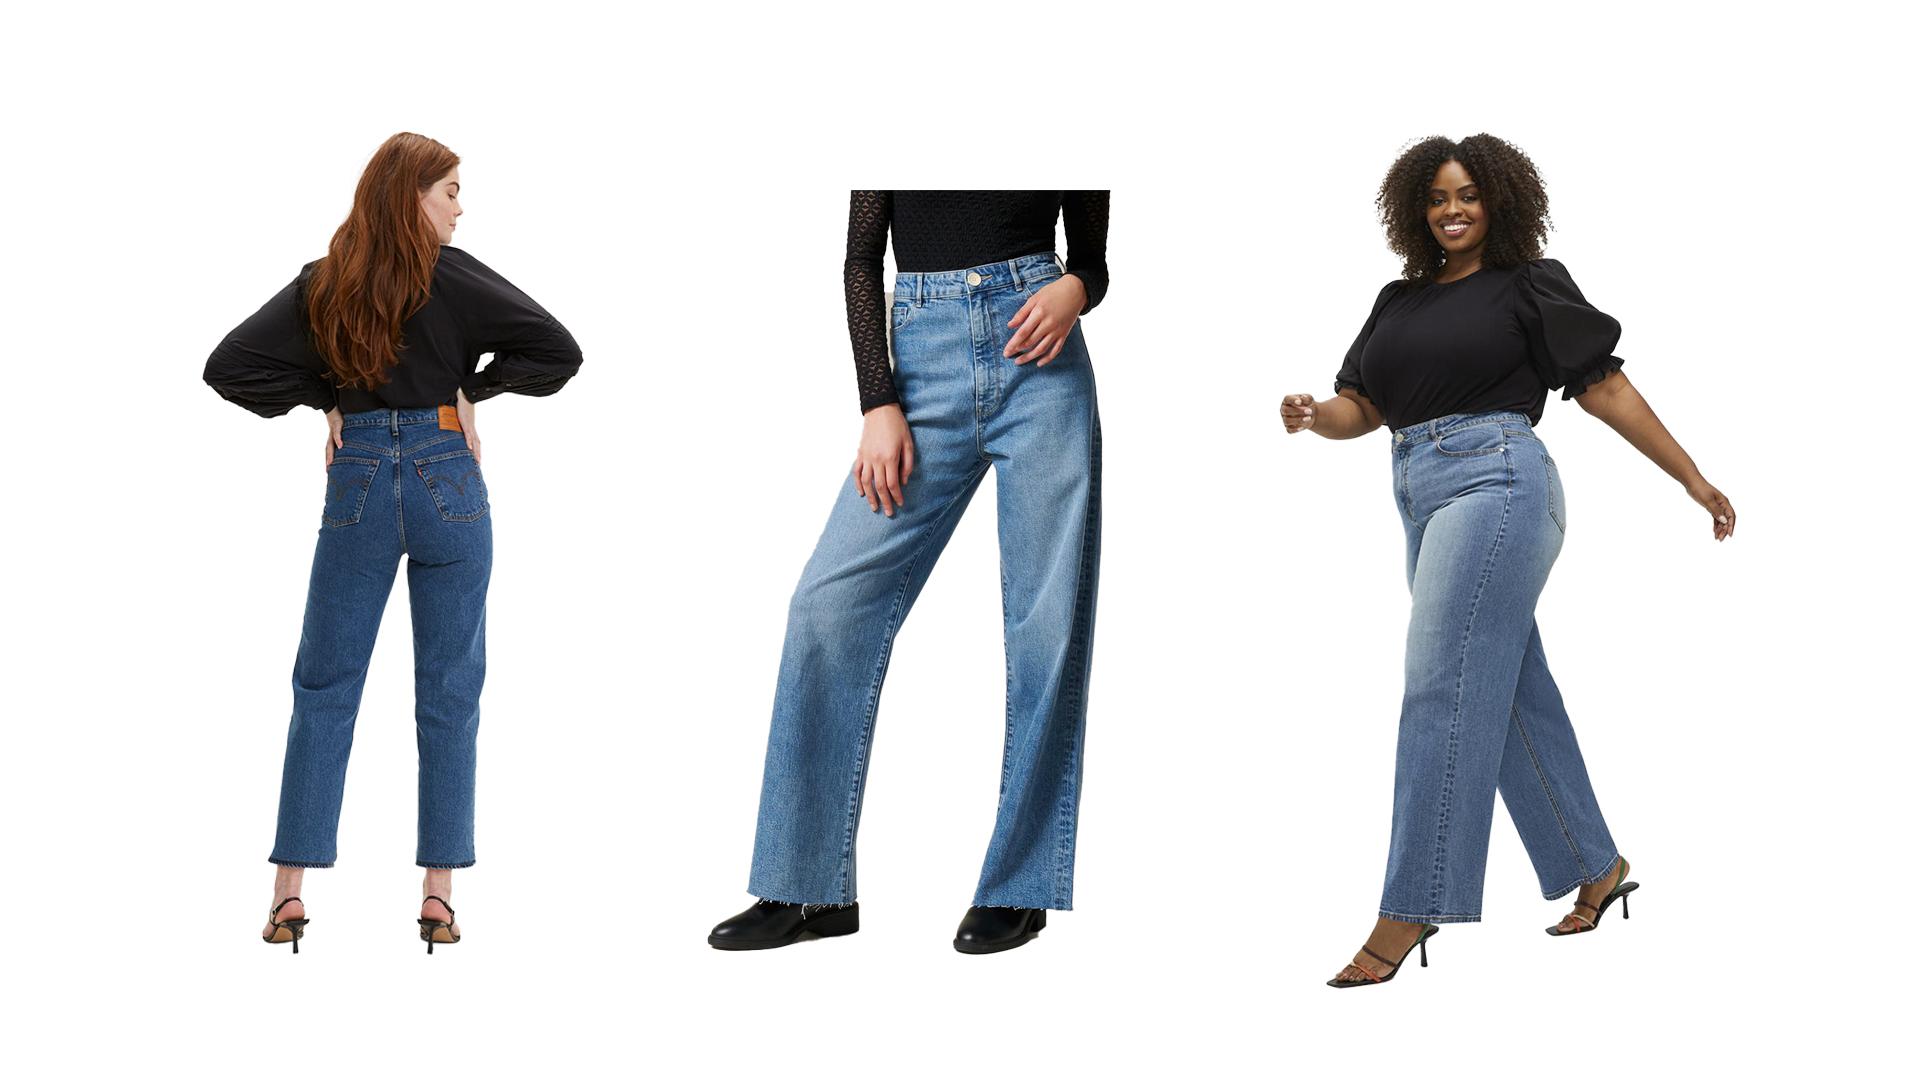 Asymmetrical One-Legged Pants Are a Strangely Sexy 2022 Trend